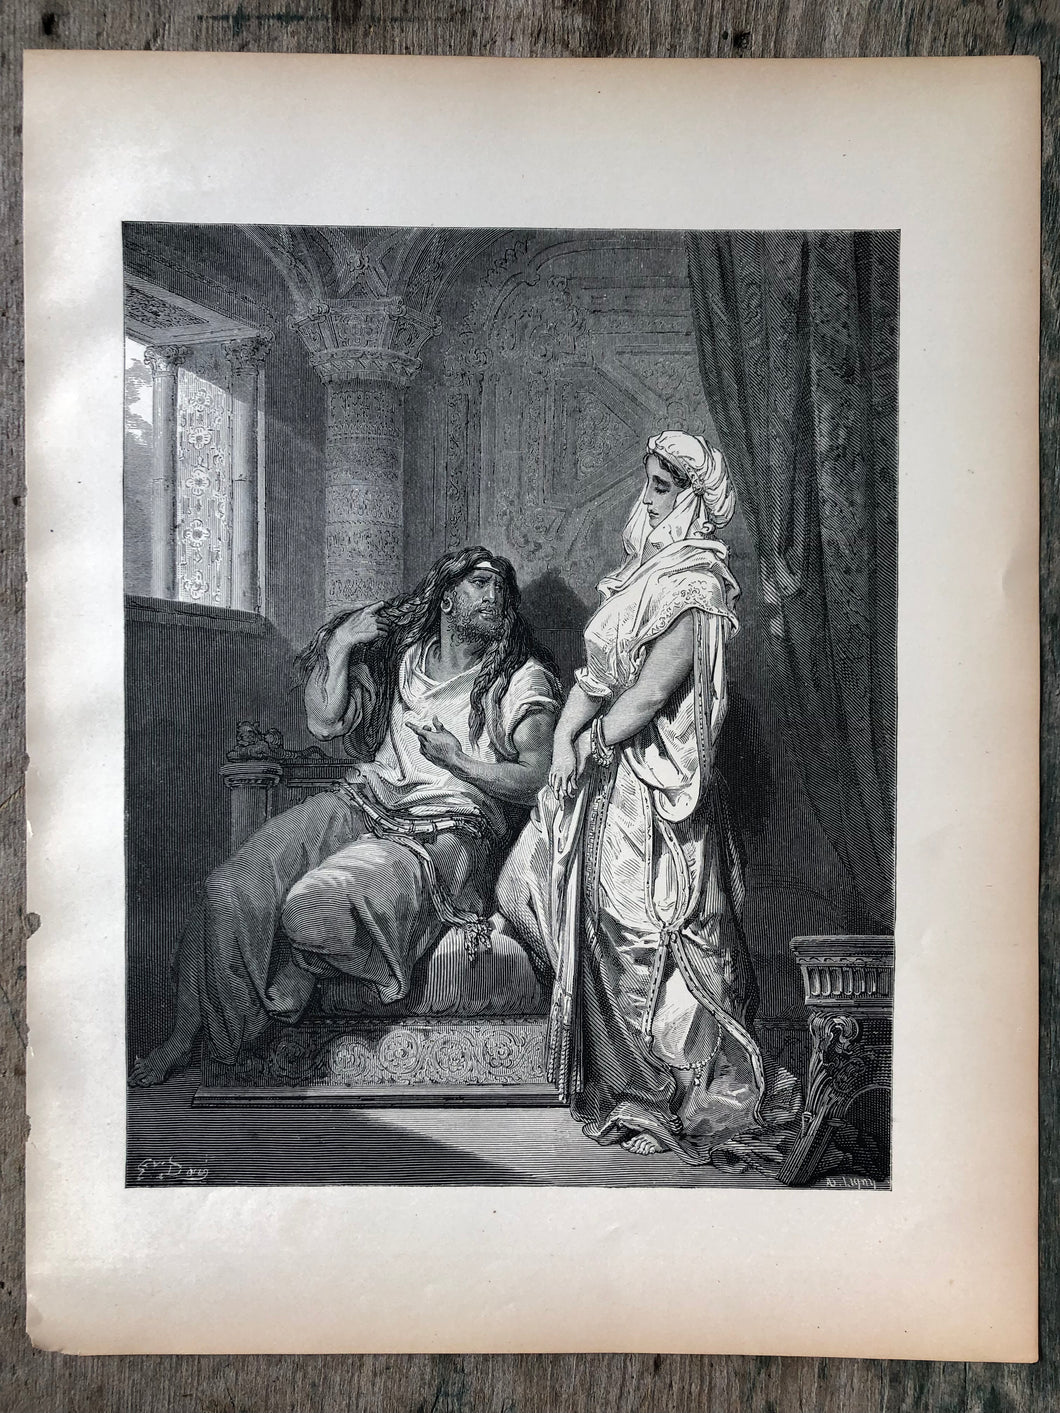 Samson and Delilah. From The Dore Bible Gallery by Gustave Dore